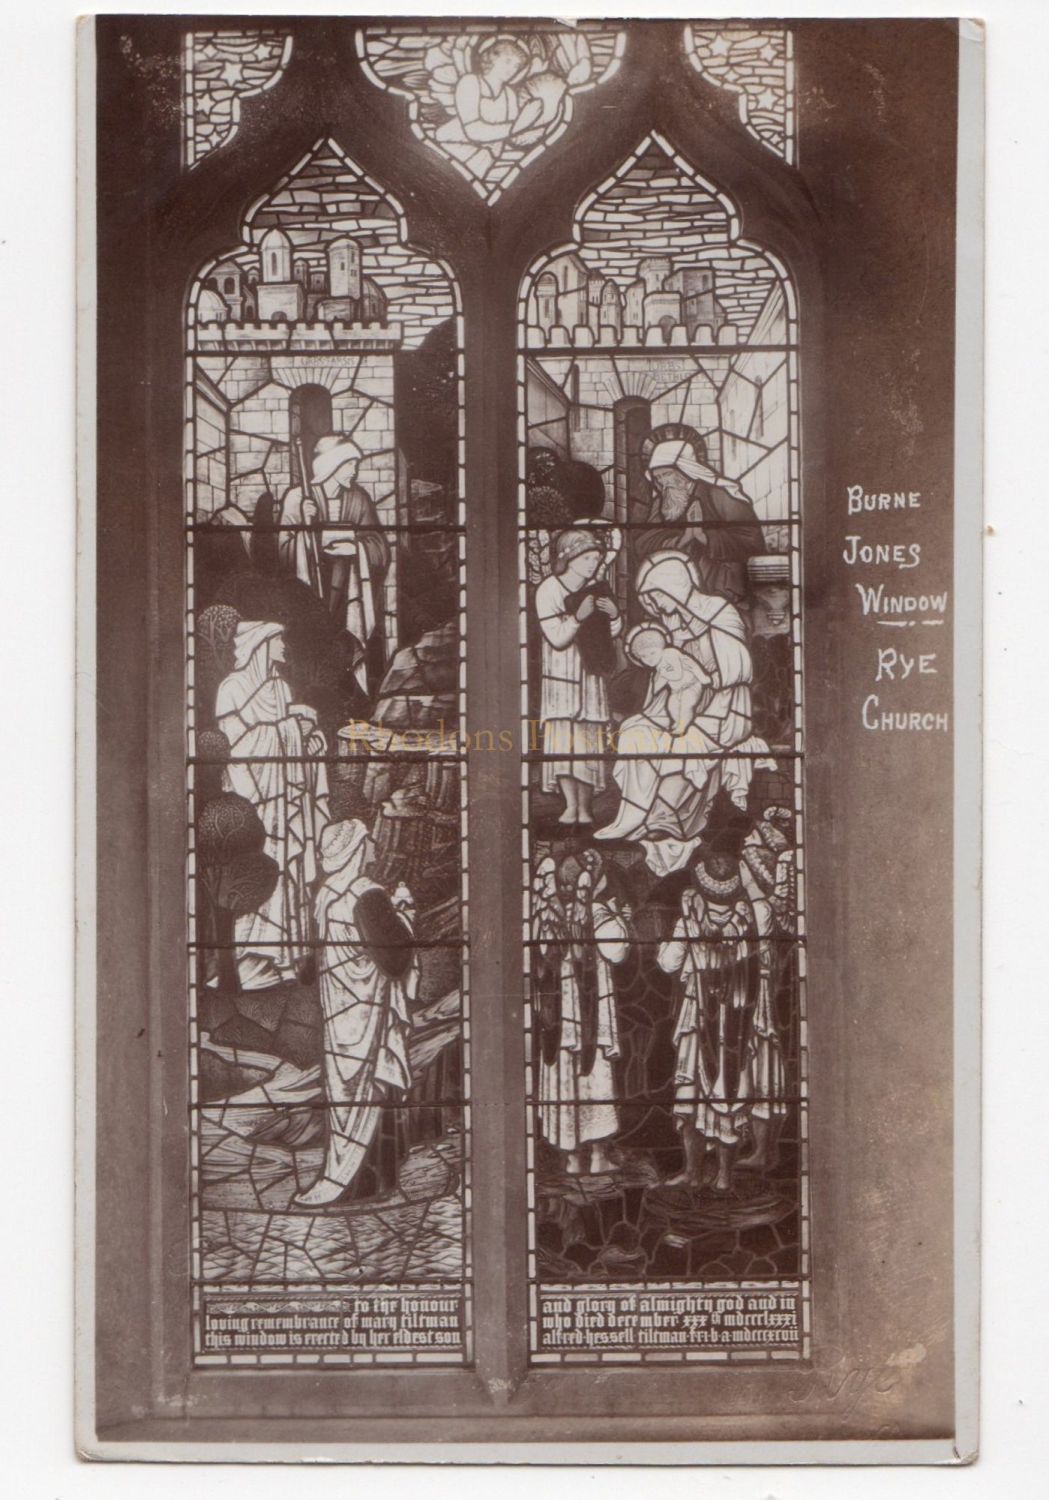 Rye Church, East Sussex - Burne Jones Stained Glass Window - Early 1900s Ph